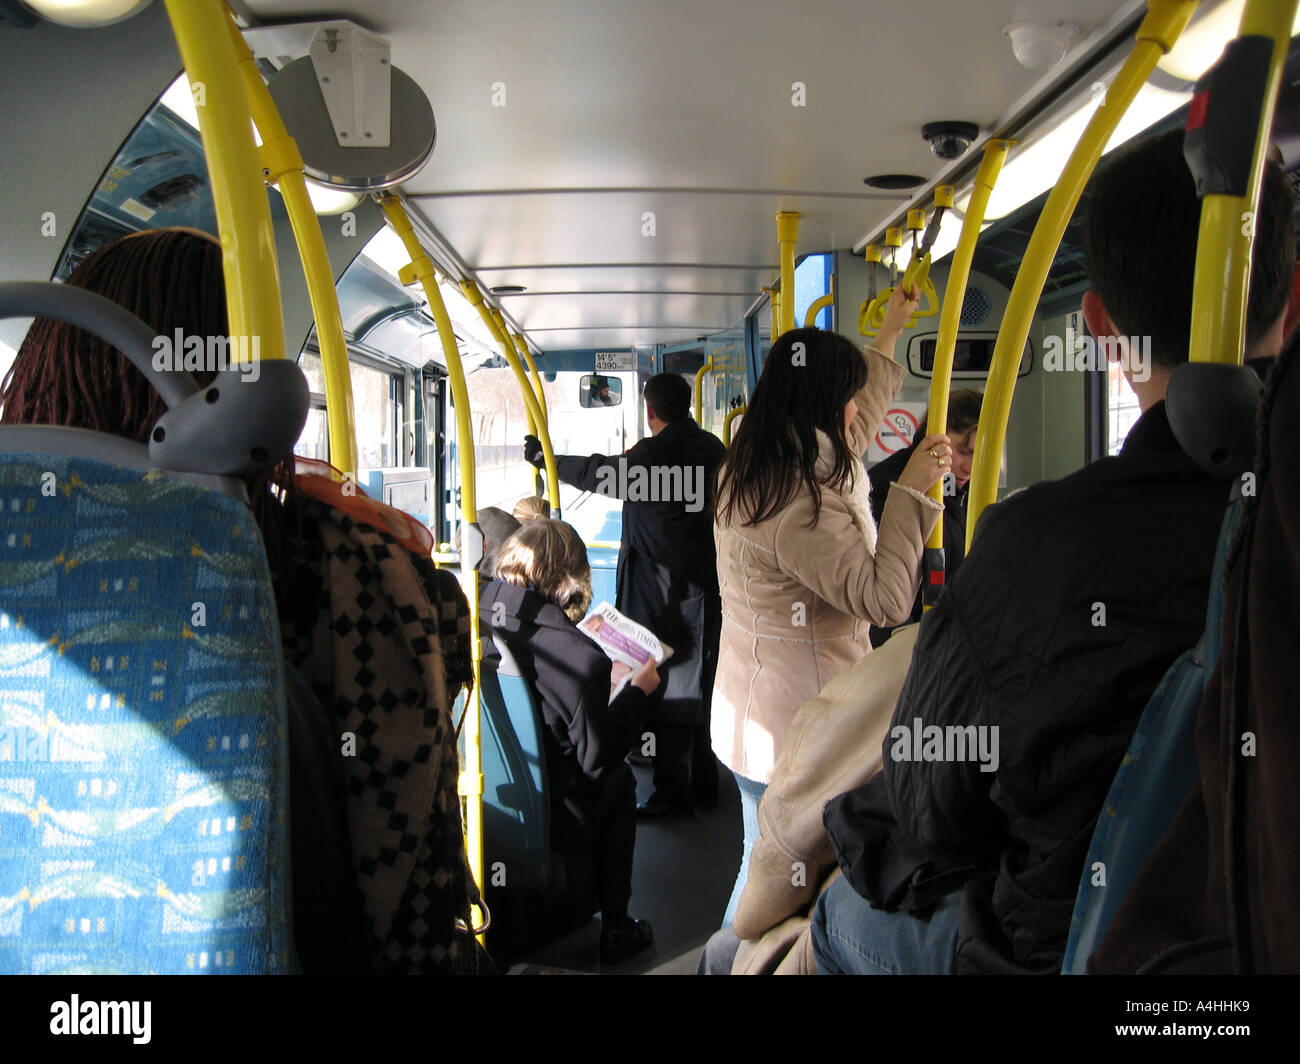 Interior of London Bendy Bus commuters standing Stock Photo